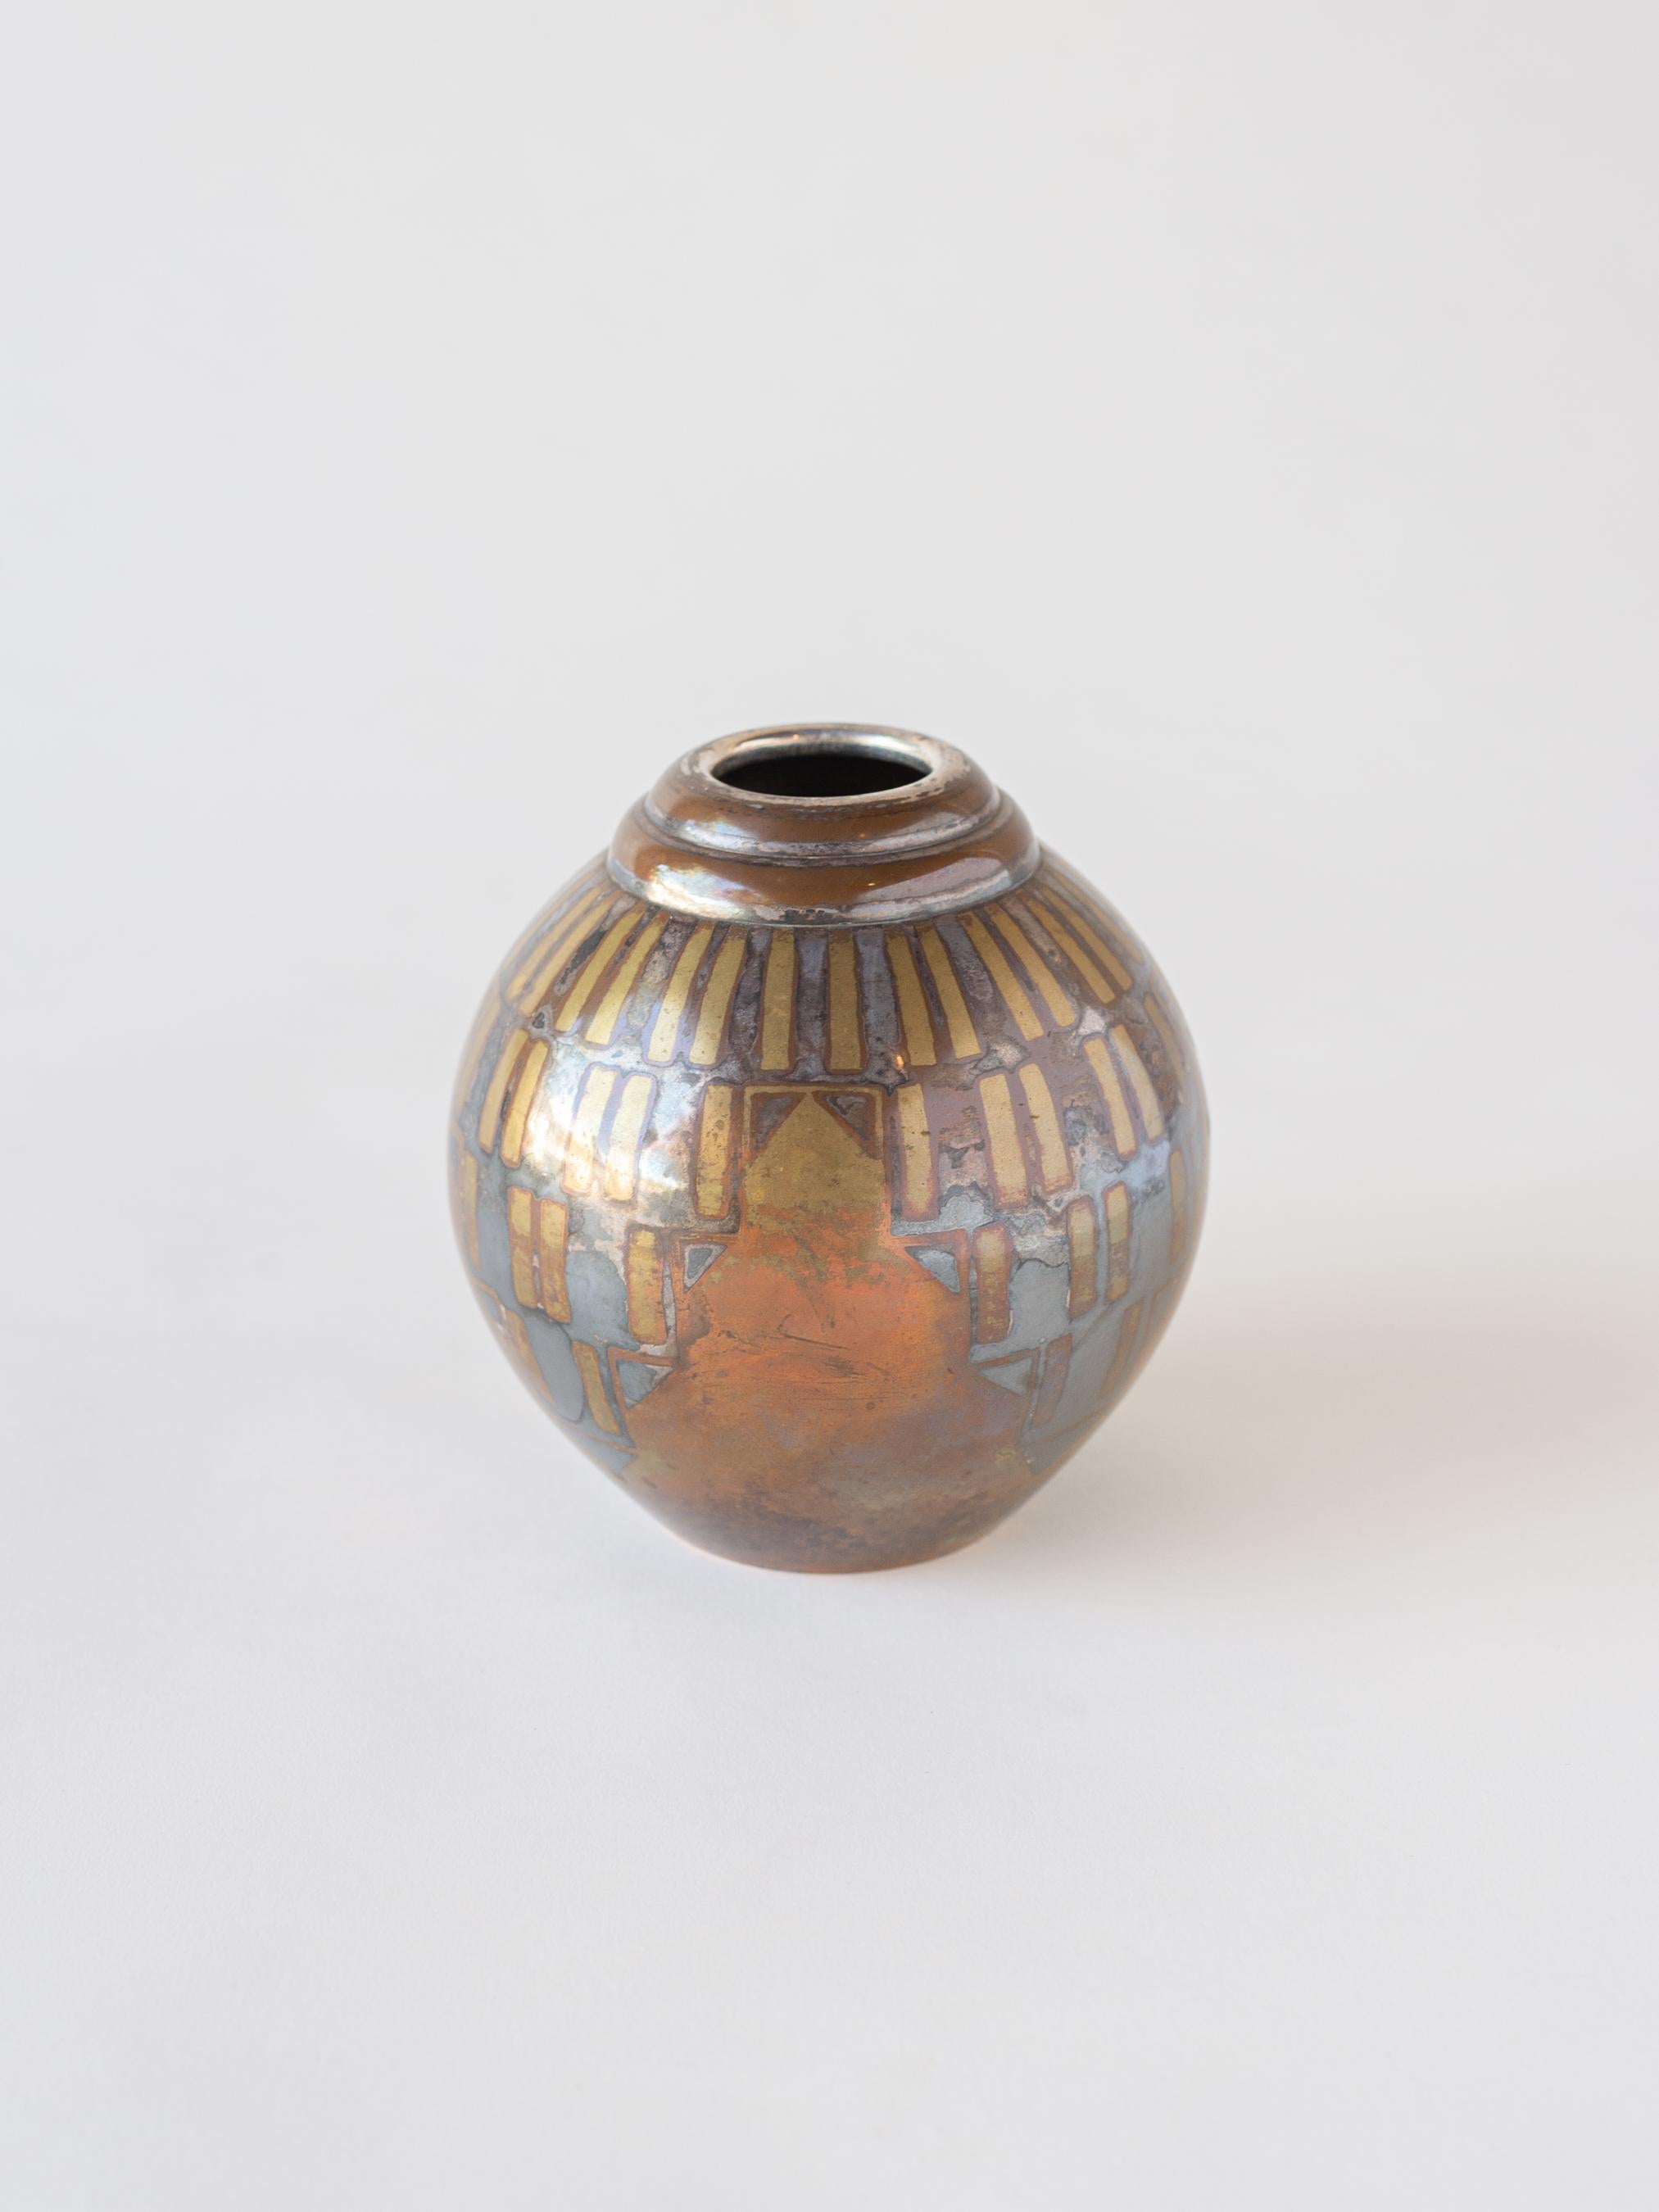 A French Art Deco vase with ovoid body and stepped lip. A heavily patinated geometric design in various metals including copper, brass, and silver decorate the body. A design by Luc Lanel (1893-1965) produced by Christofle Paris in the 1930s.